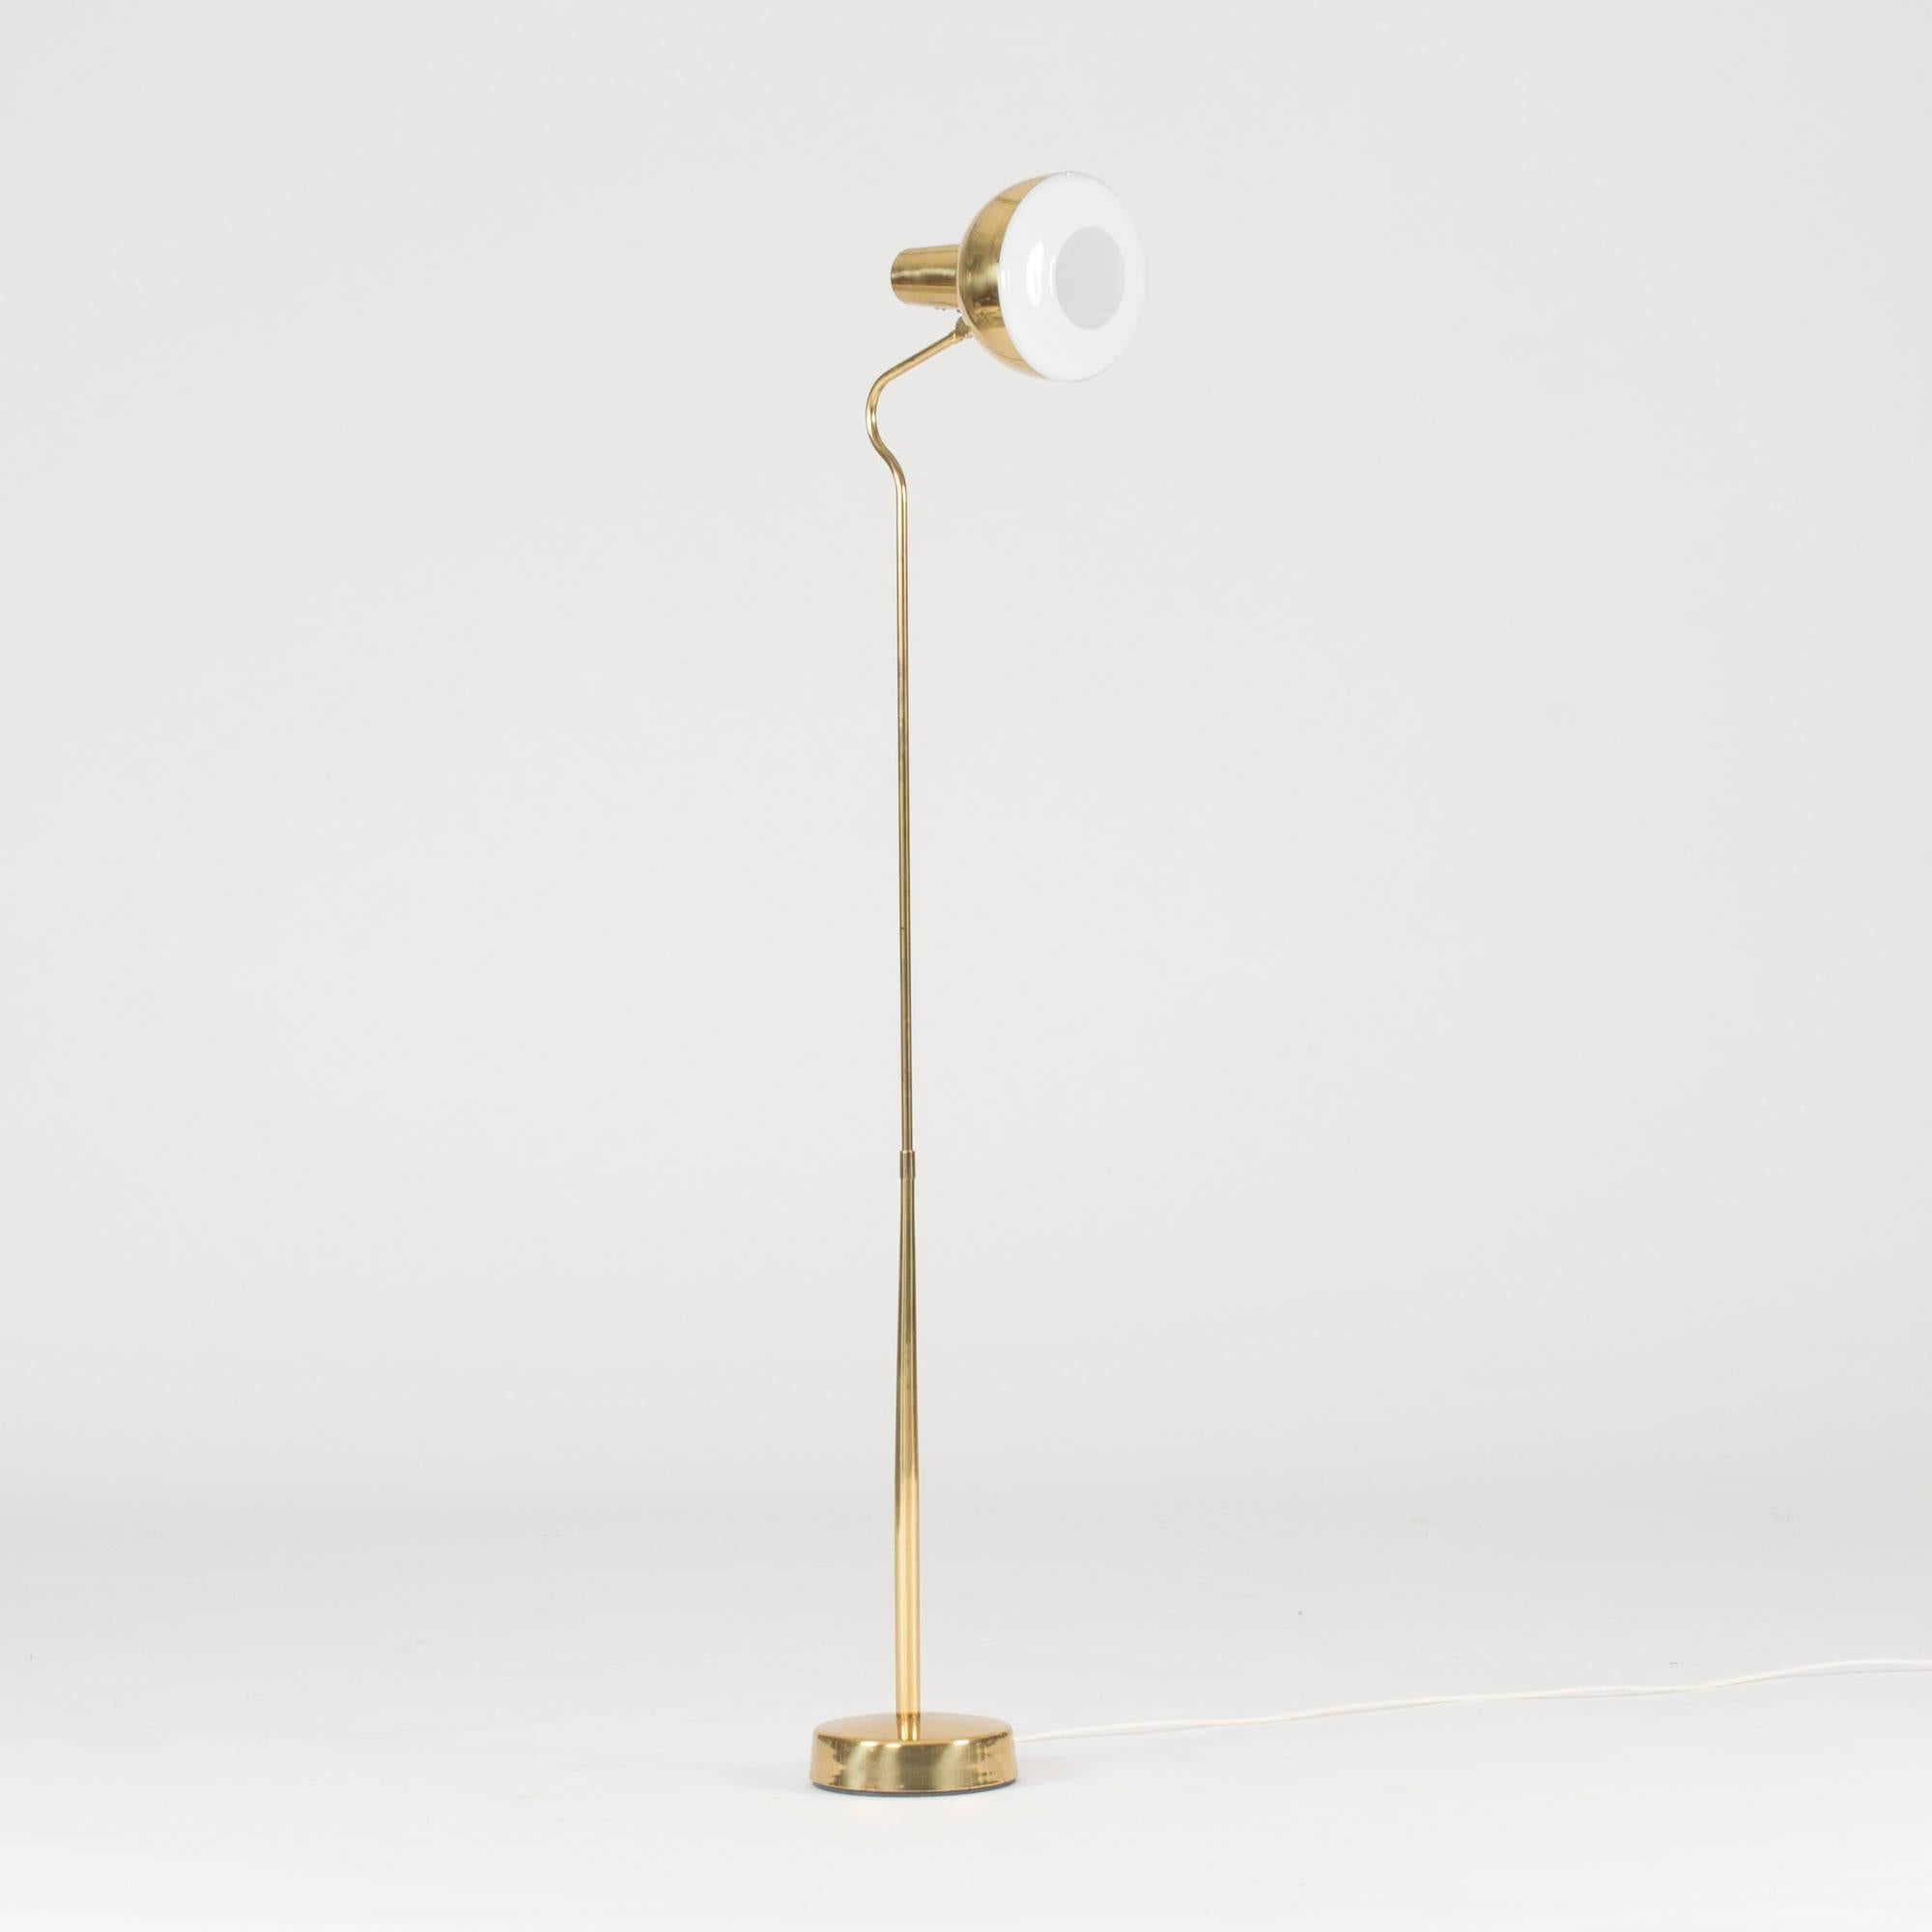 Brass floor lamp from ASEA in a simplistic design with elegant curves.